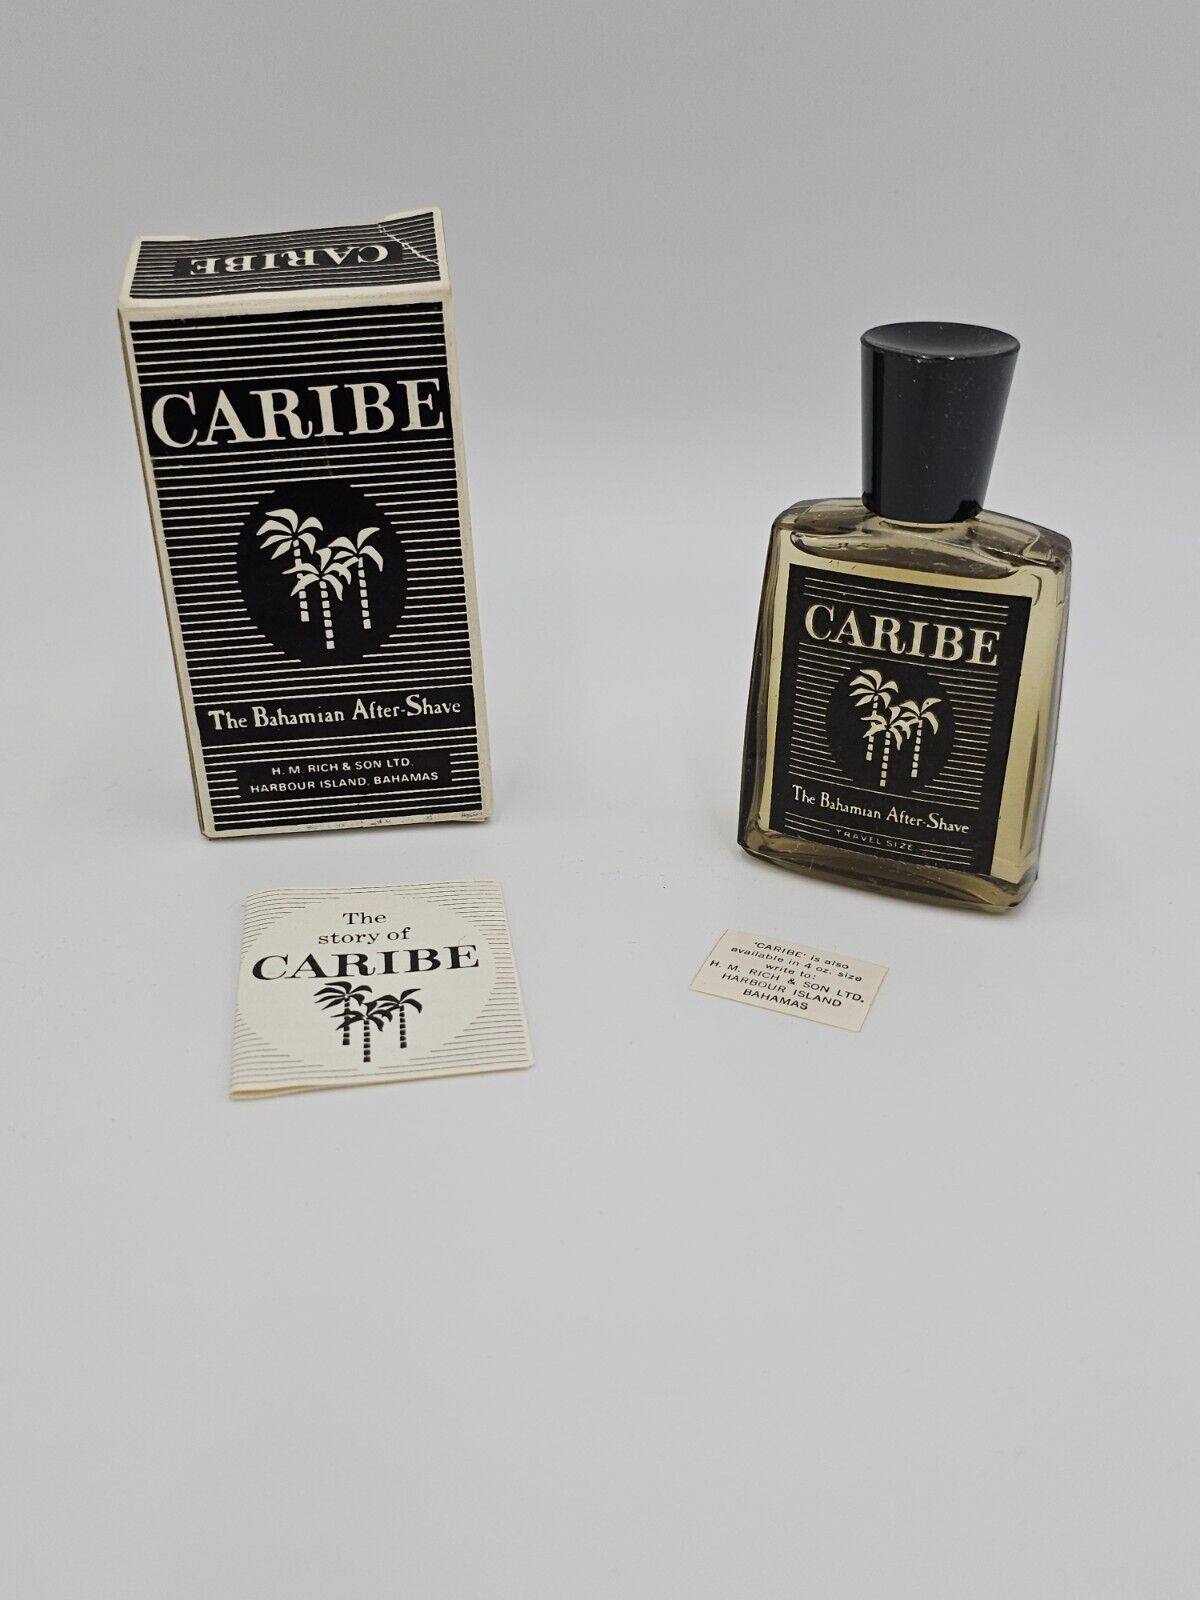 ORIGINAL 70s Vintage Caribe The Bahamian after shave H.M RICH & Son Travel size